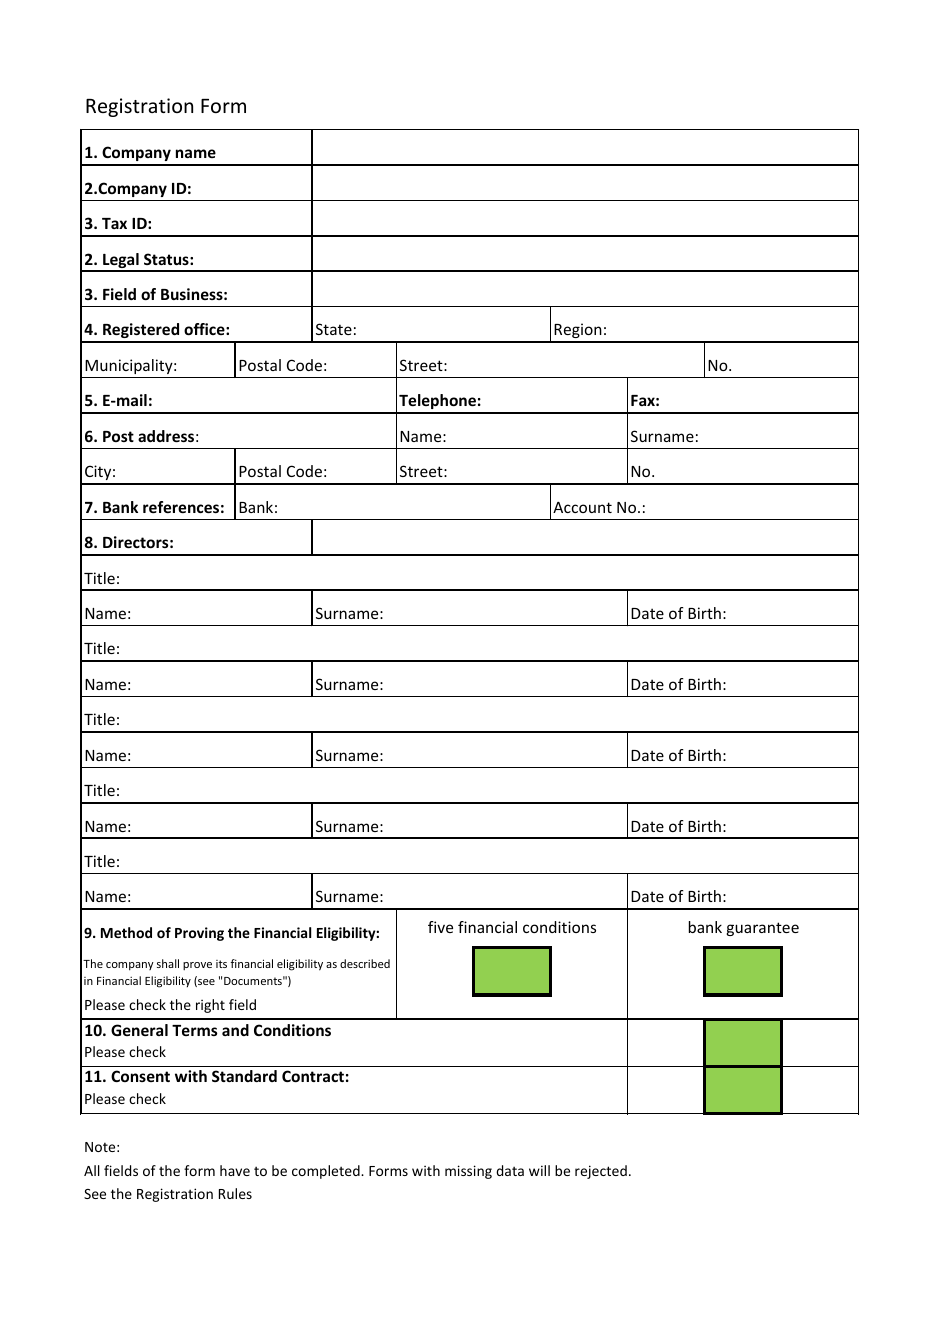 company-registration-form-fill-out-sign-online-and-download-pdf